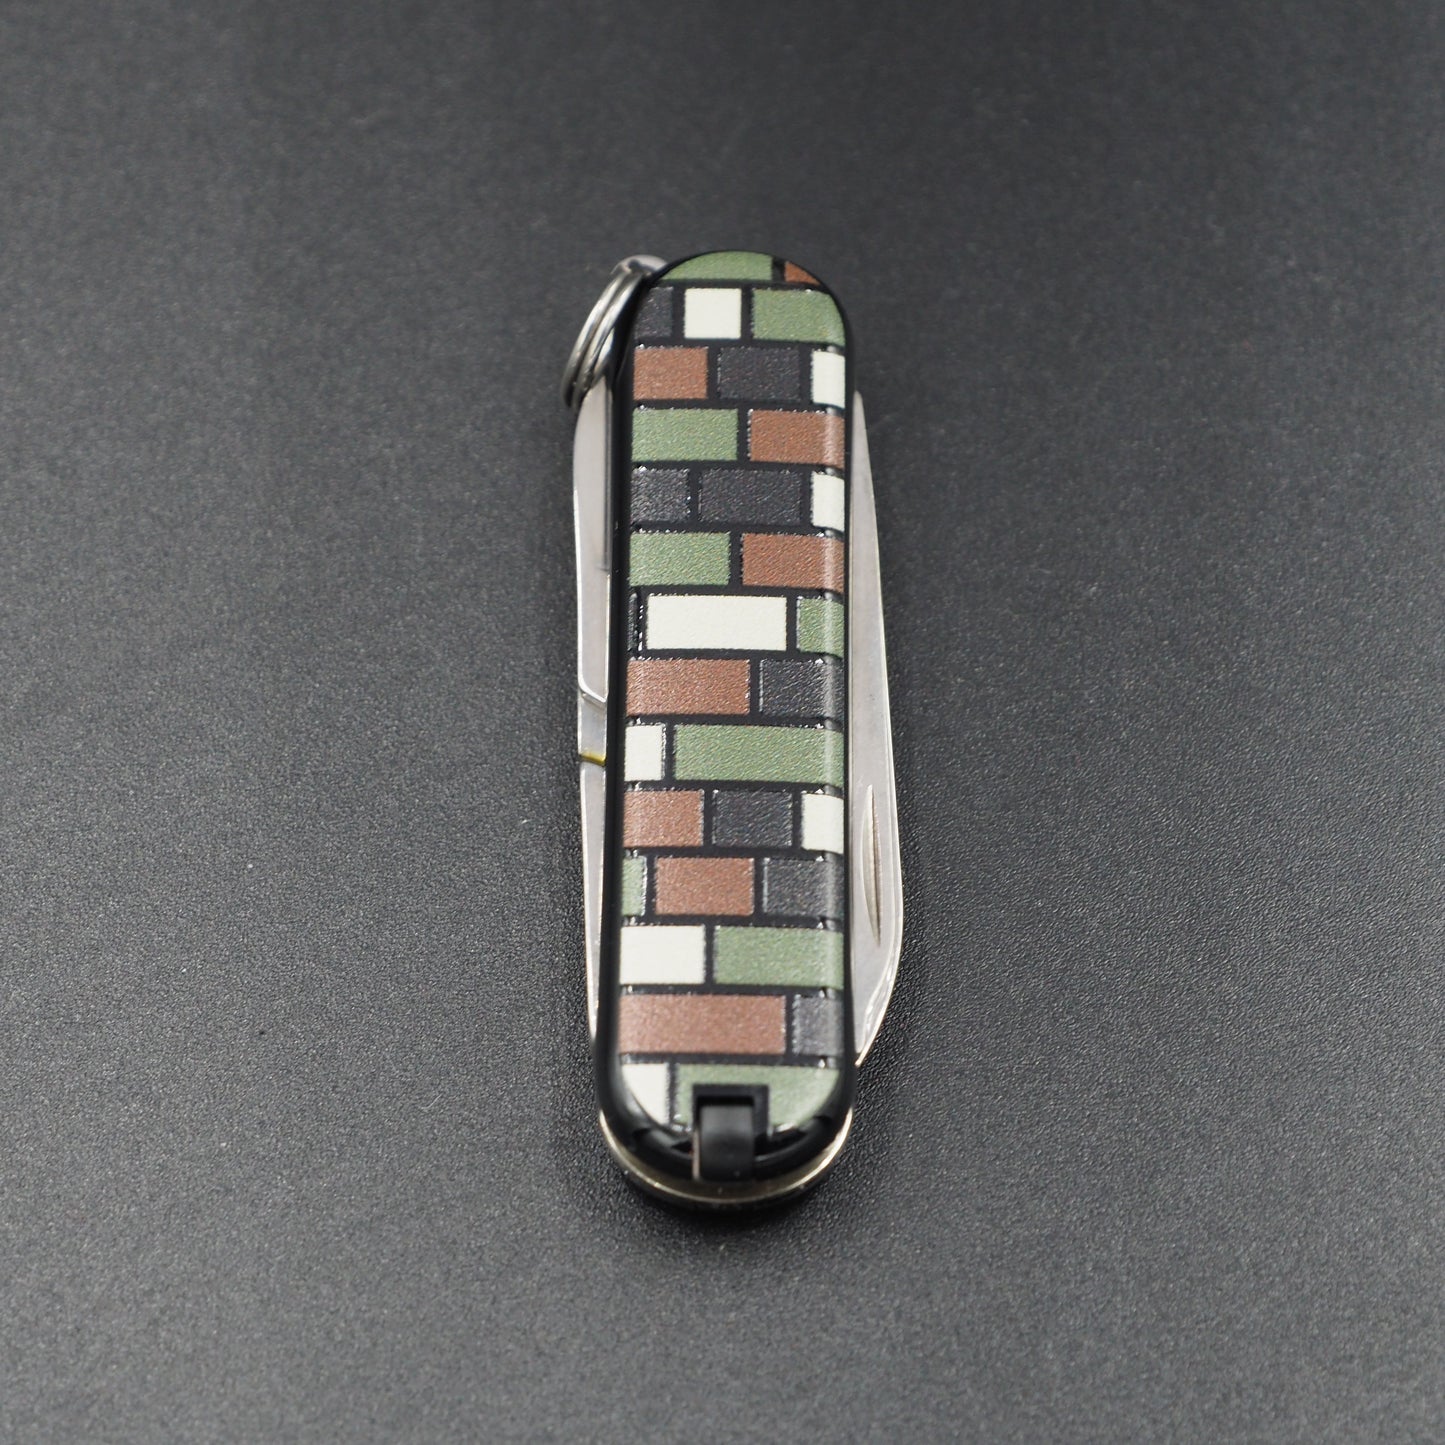 Victorinox Classic Camouflage Bricks 1 3D Edition 58mm The Color 3 The Sharp Knife Club Edition